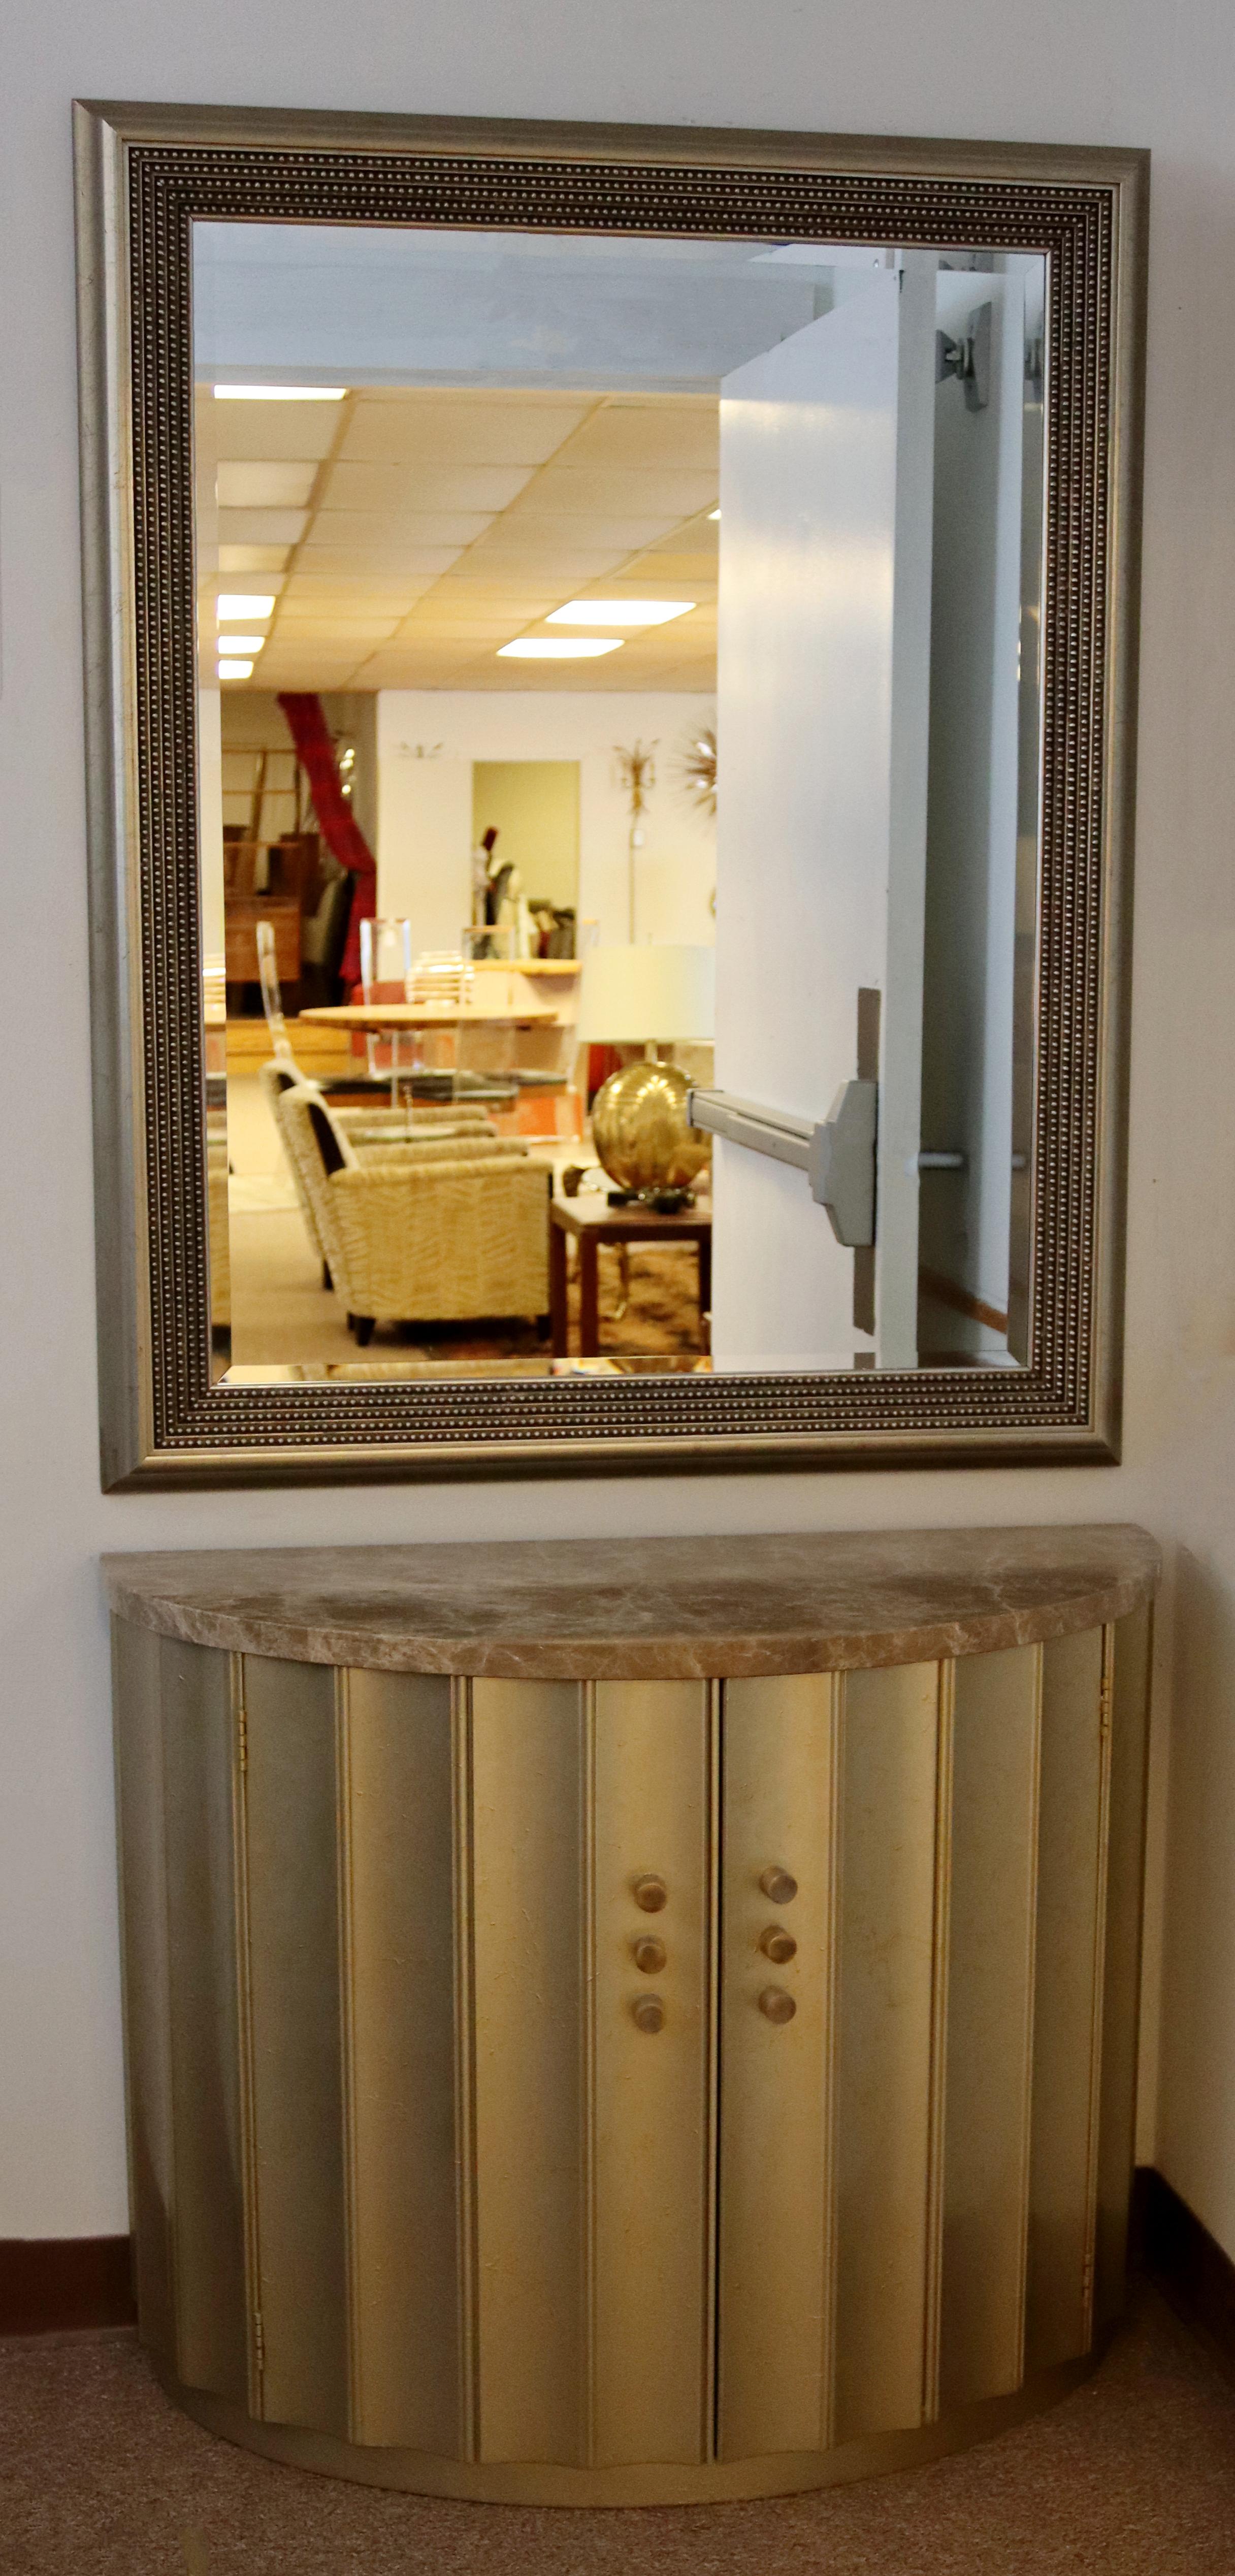 For your consideration is a phenomenal, gold gilt wall mirror and matching, marble topped demilume console table, with one shelf, circa the 1980s. In excellent vintage condition. The dimensions of the mirror are 37